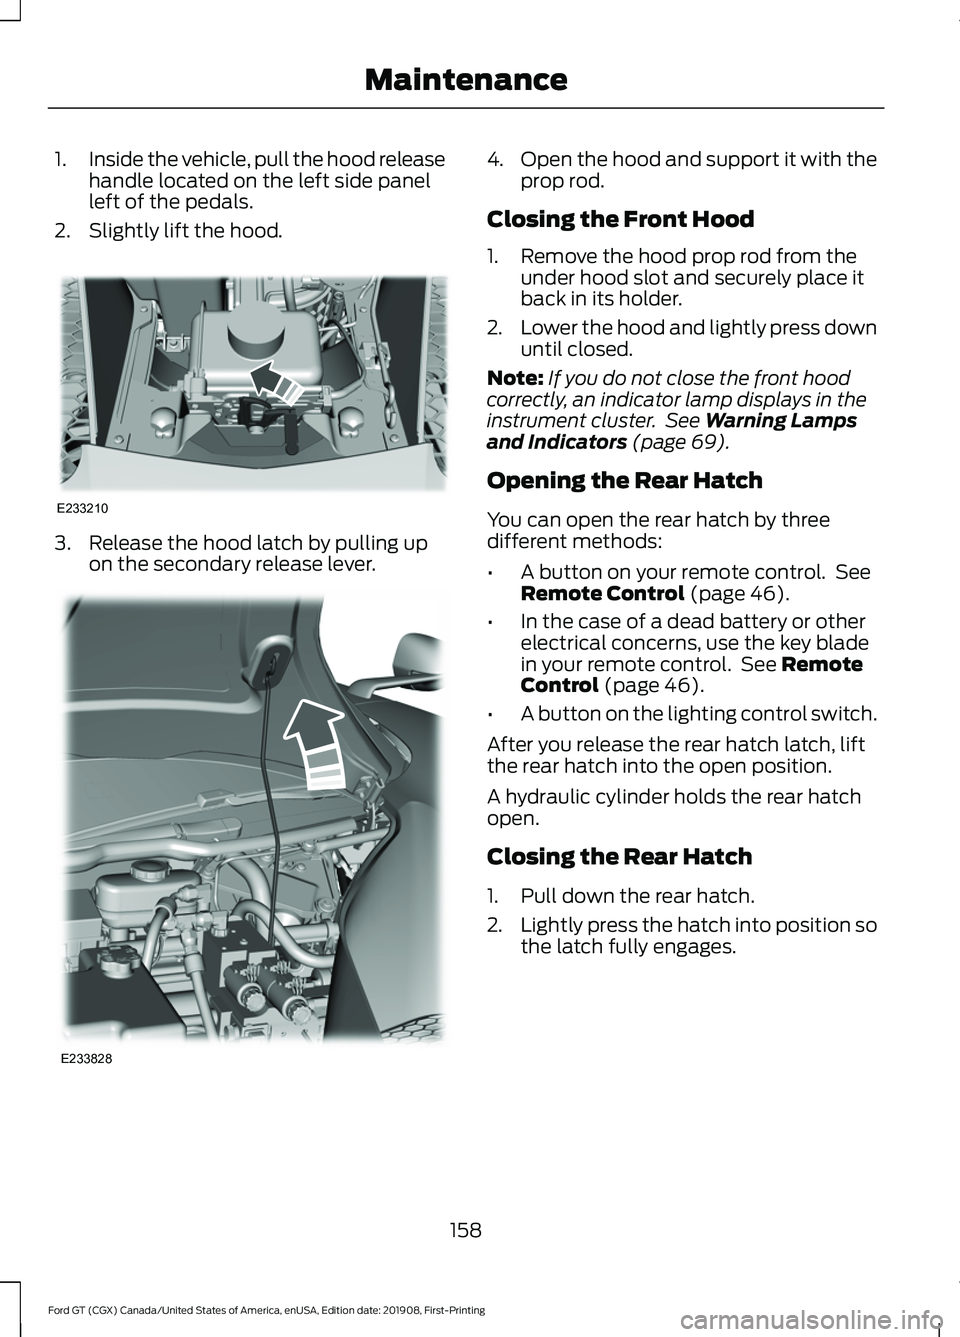 FORD GT 2020  Owners Manual 1.
Inside the vehicle, pull the hood release
handle located on the left side panel
left of the pedals.
2. Slightly lift the hood. 3. Release the hood latch by pulling up
on the secondary release lever